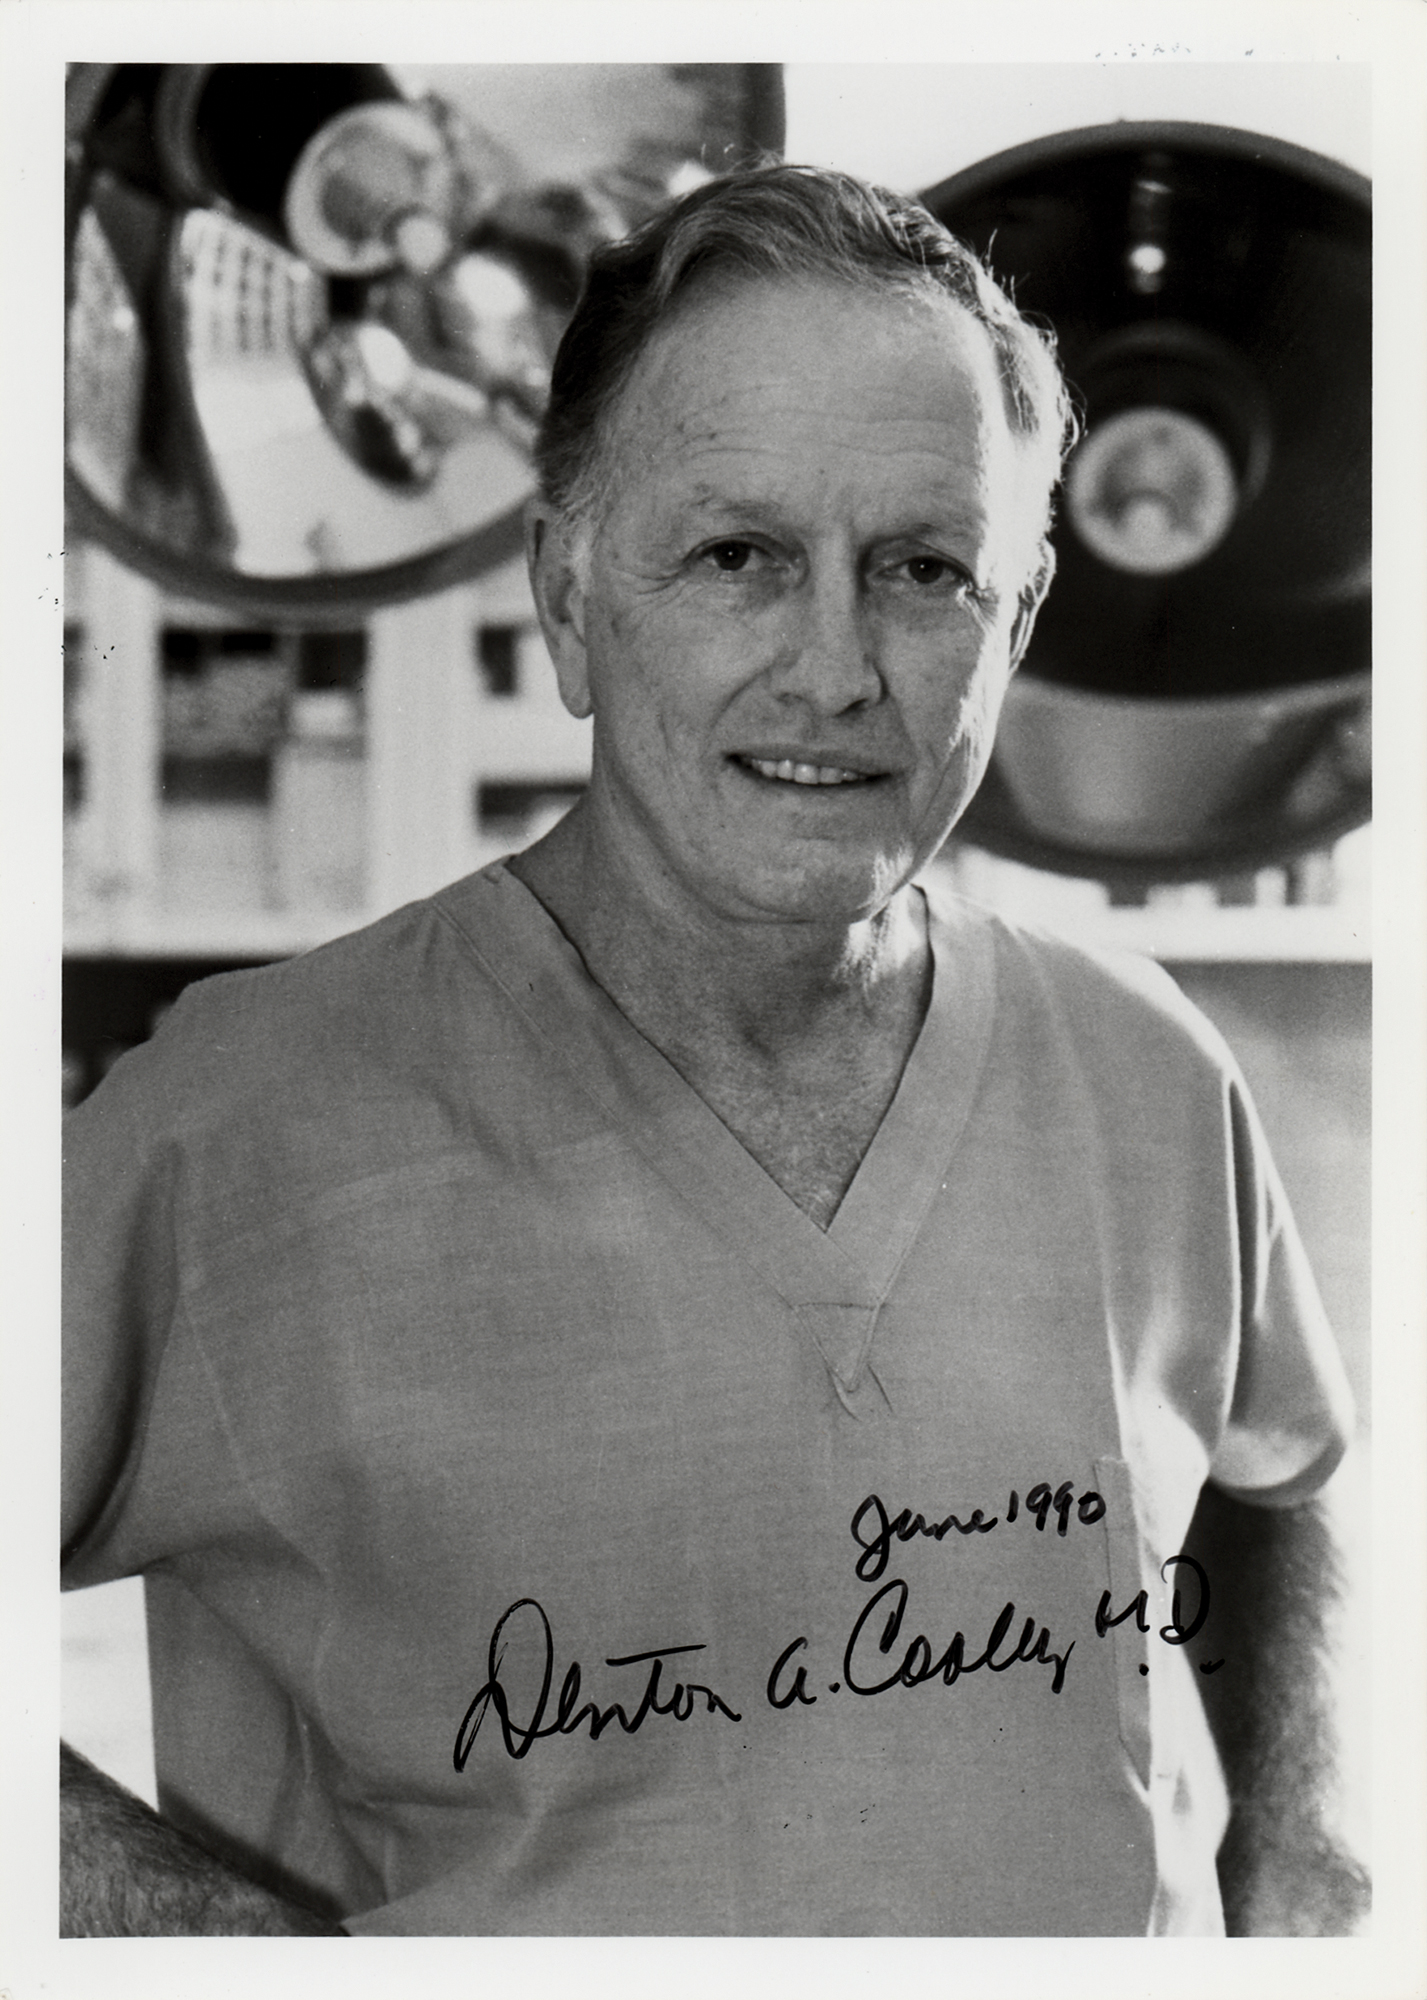 Lot #160 Denton Cooley Signed Photograph